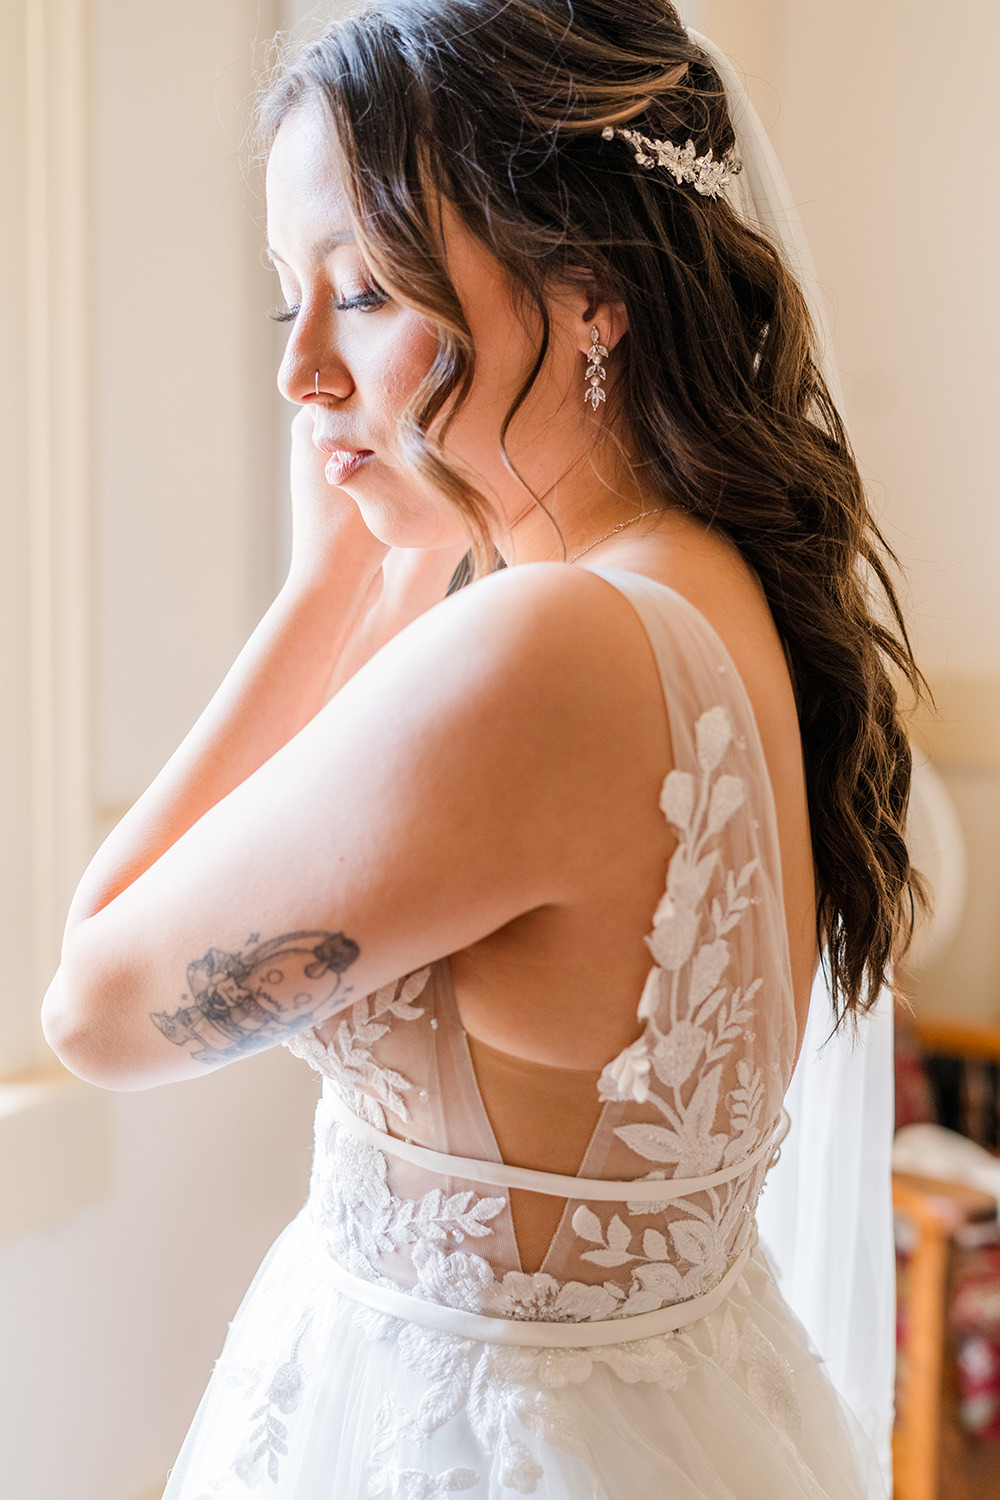 bridal getting ready details at a northstar house wedding in nevada city california